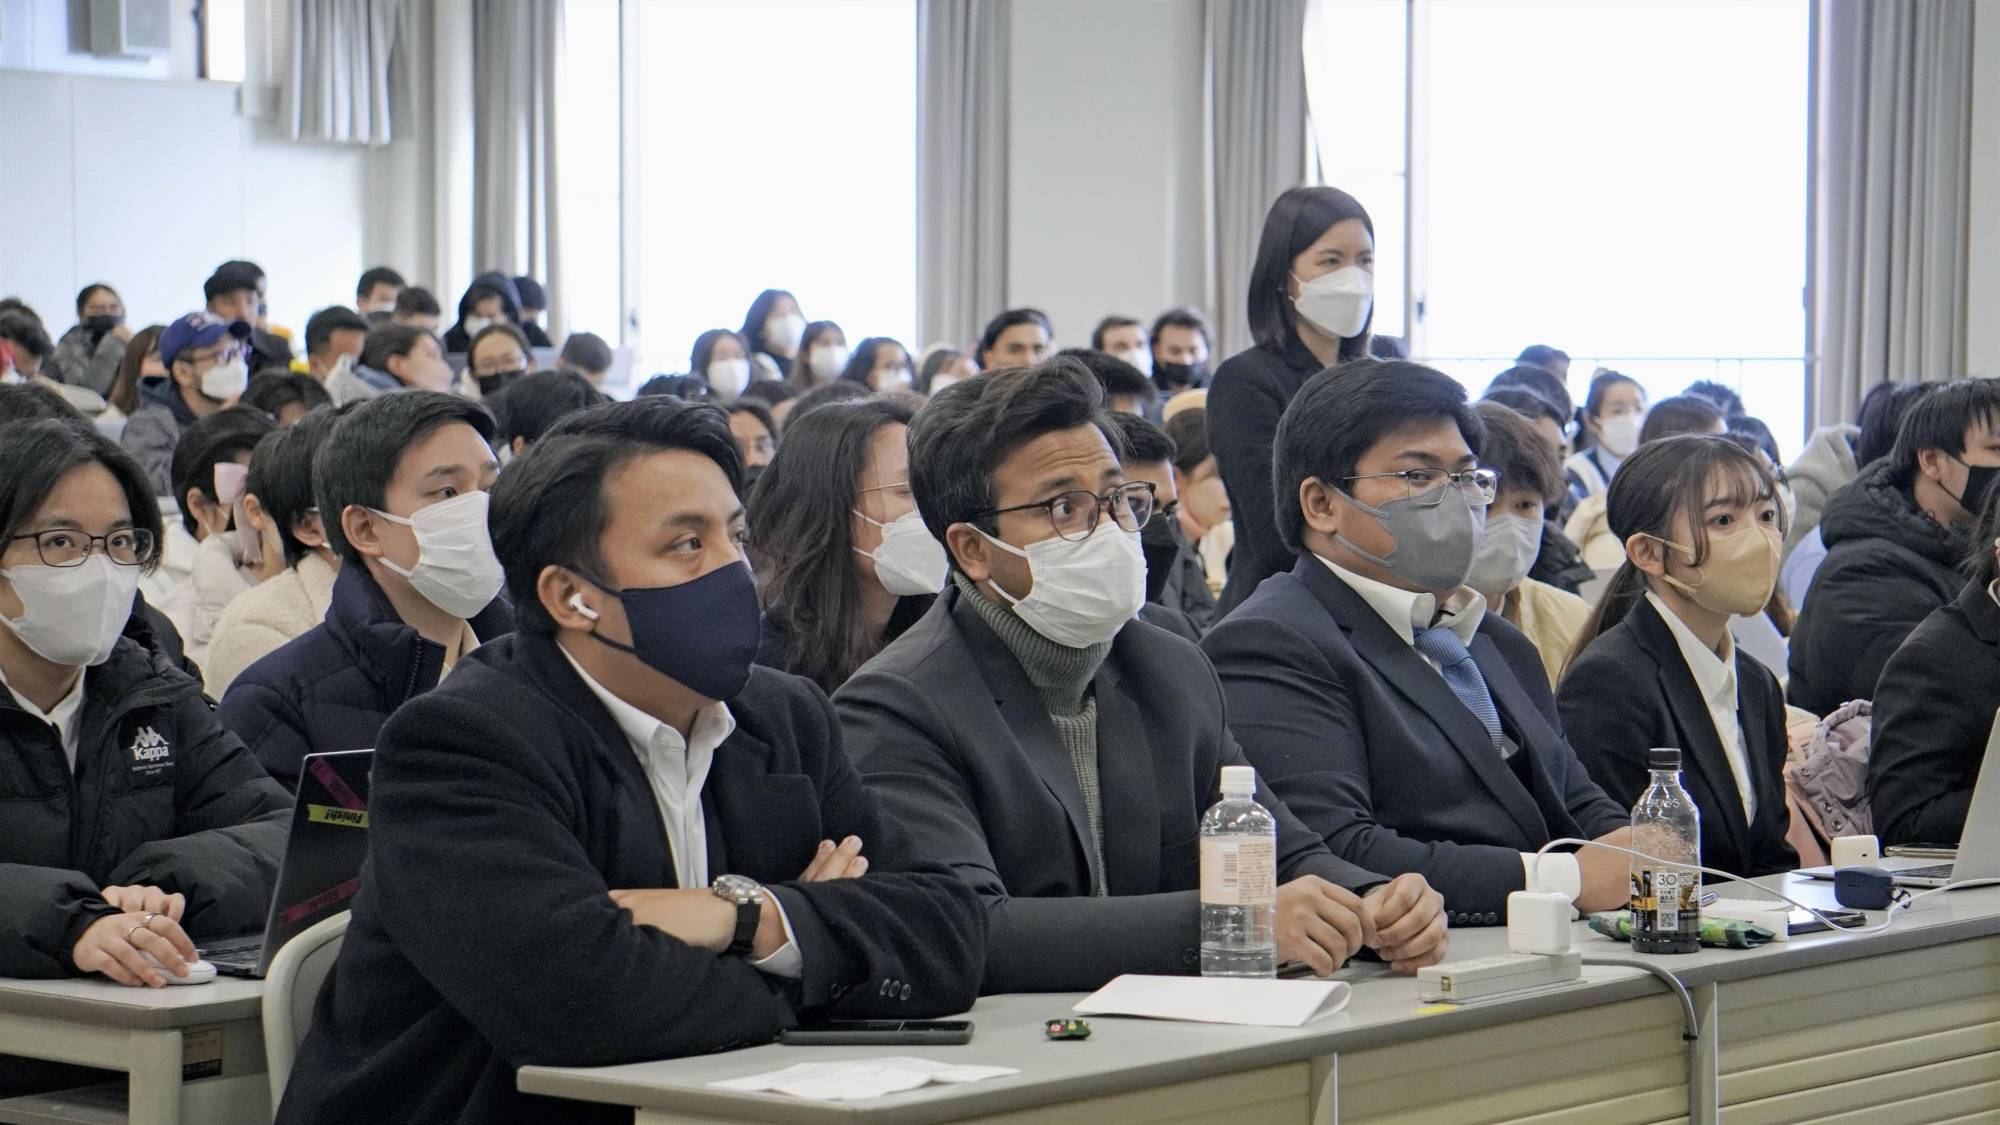 Foreign students learns about Japanese companies, in Beppu, Oita Prefecture. in January. A government panel has called for Japan to accept 400,000 international students by 2033. | RITSUMEIKAN ASIA PACIFIC UNIVERSITY / VIA KYODO